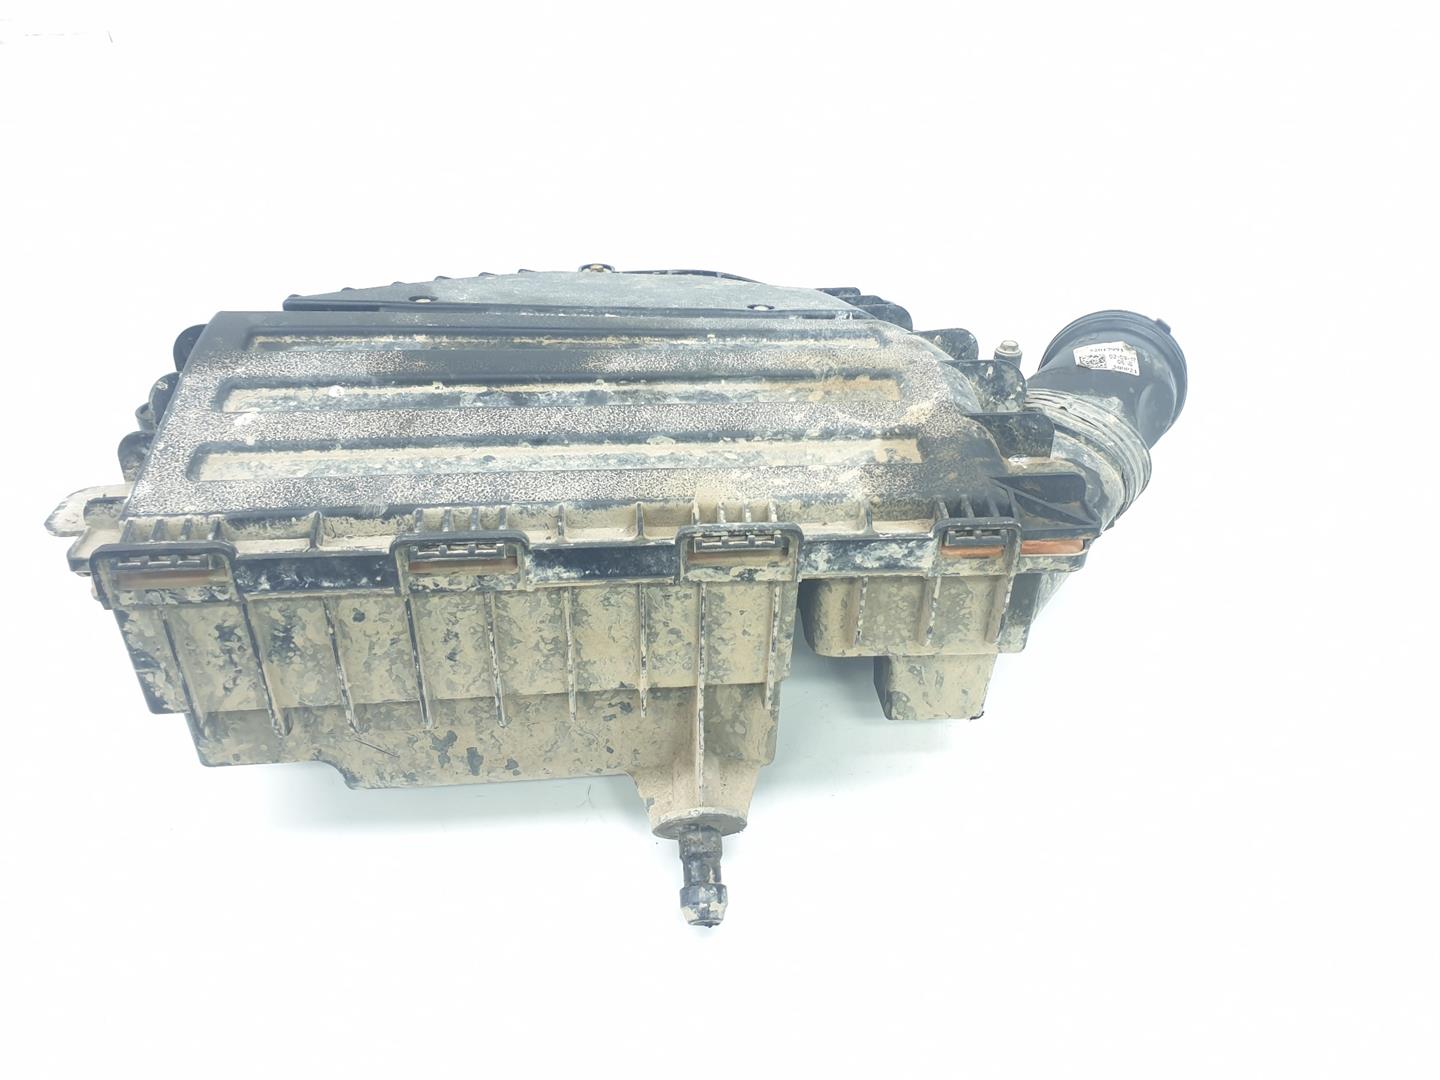 OPEL Combo D (2011-2020) Other Engine Compartment Parts 95524774, 95524774 24243615